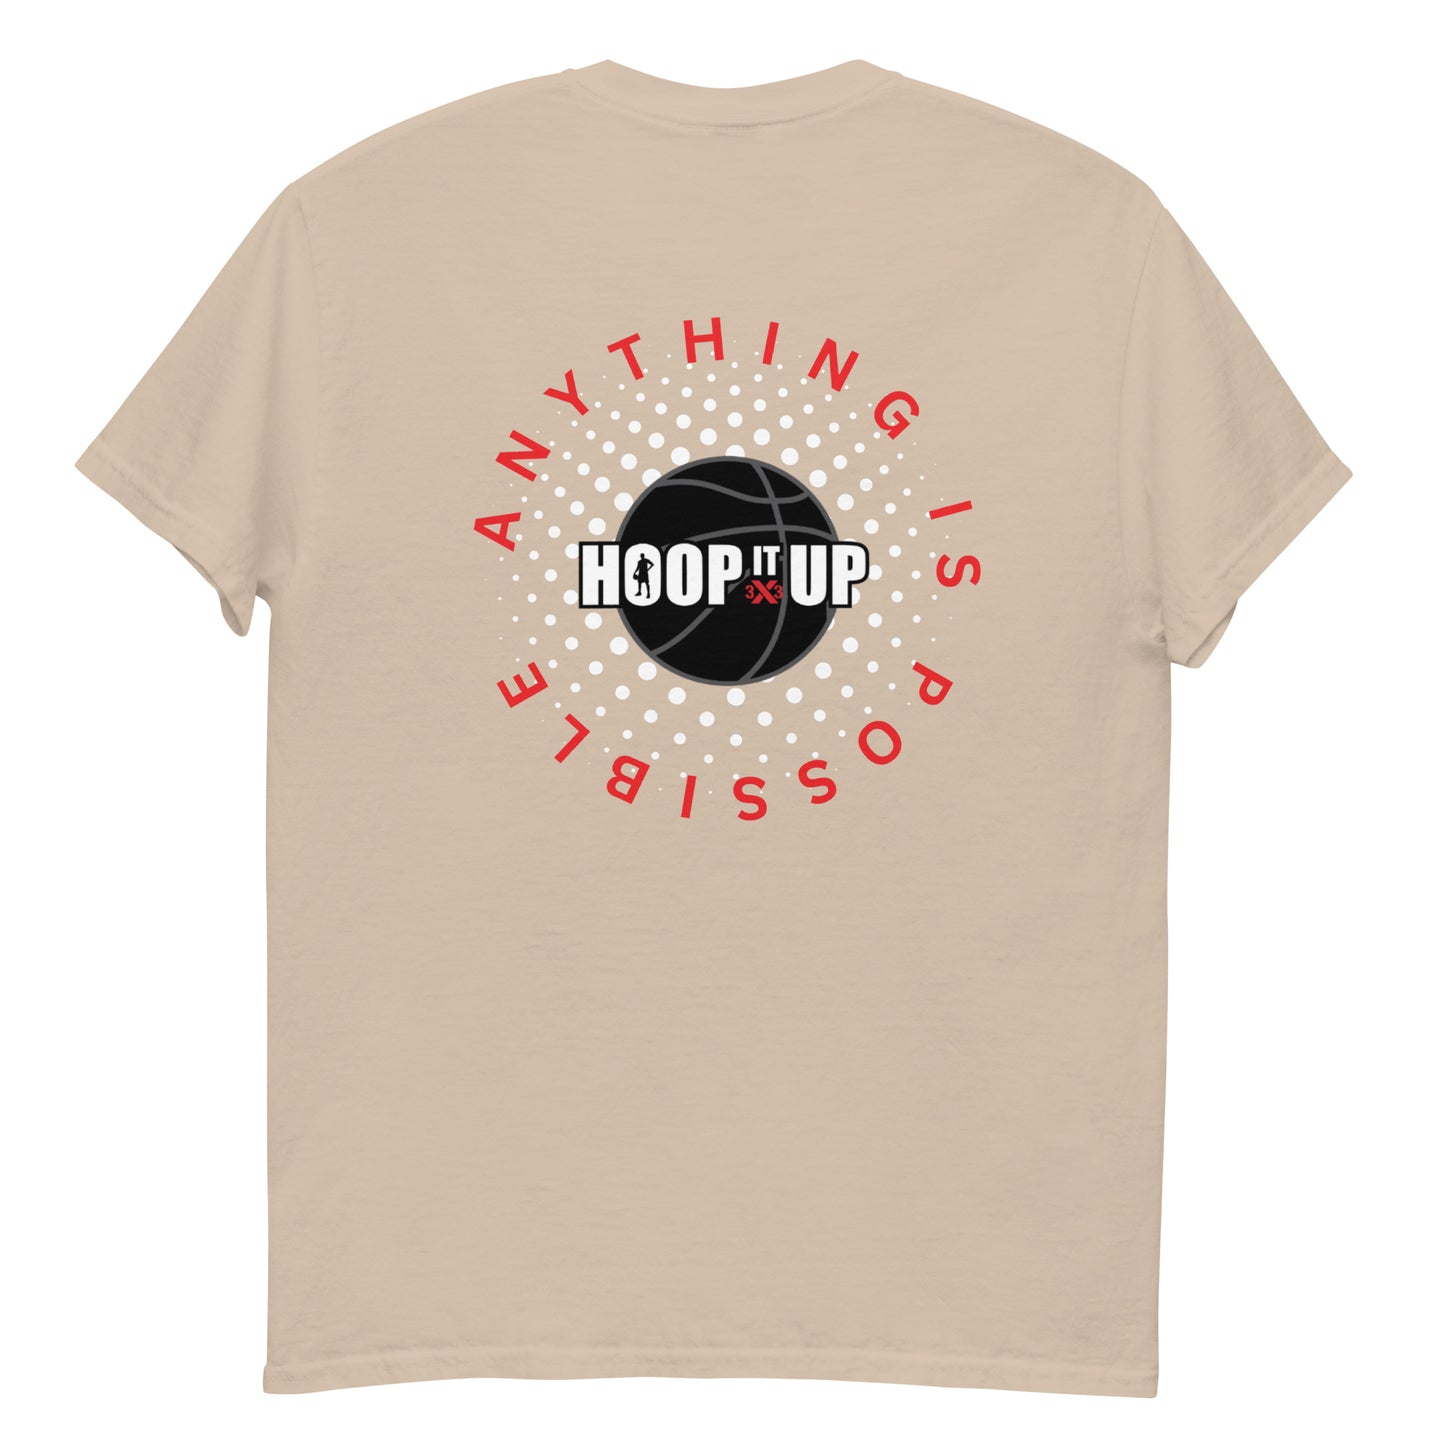 Anything is Possible classic tee